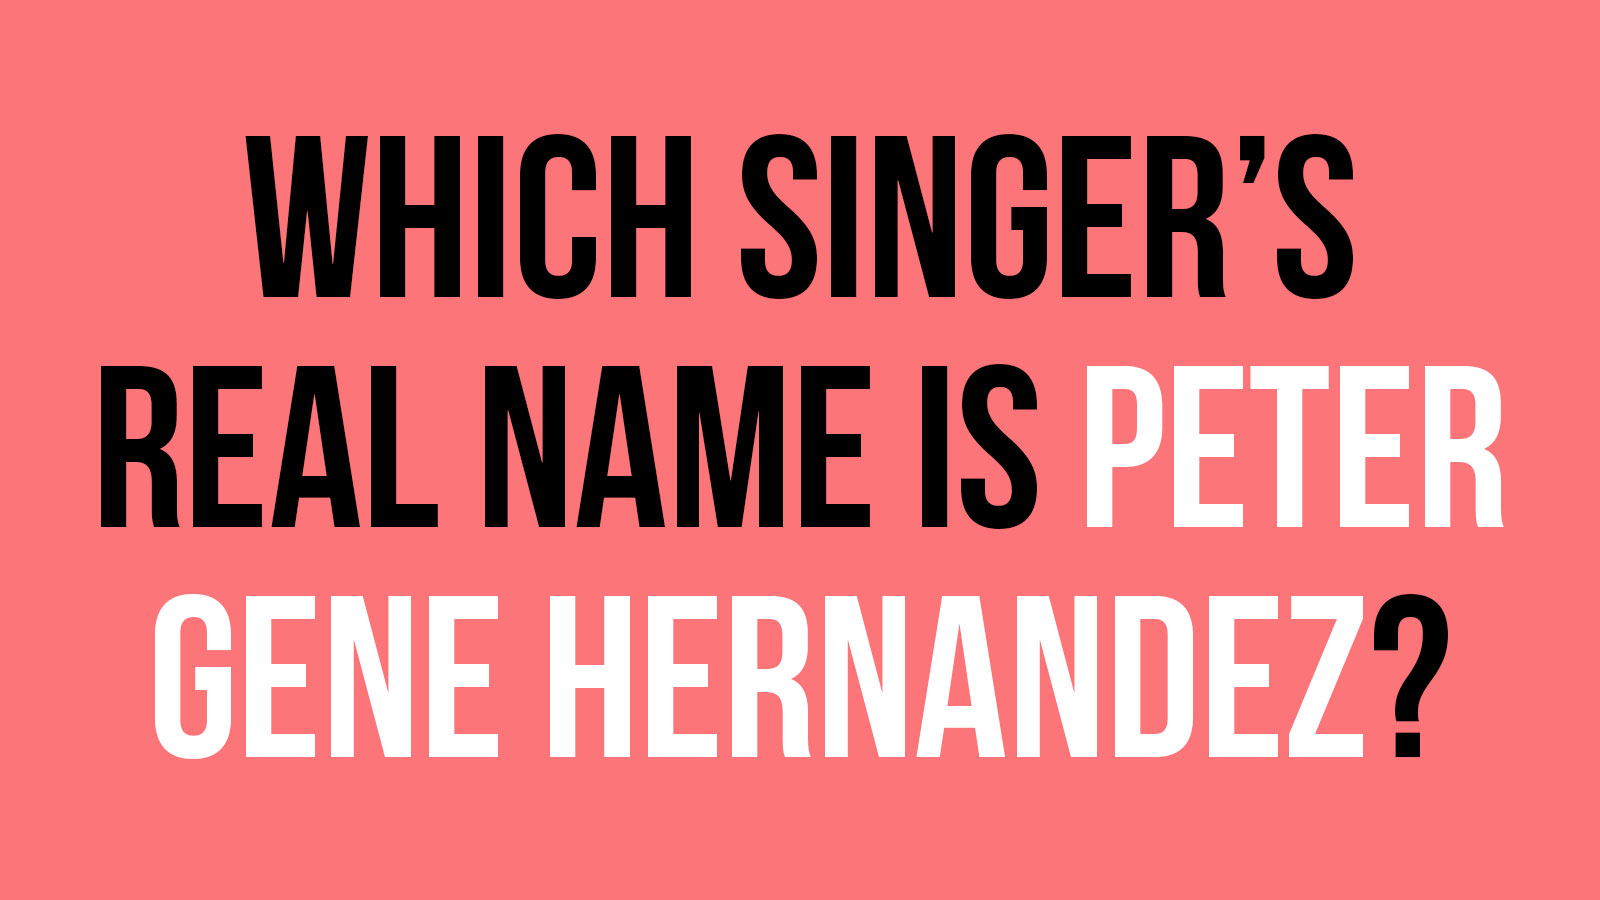 If You Think You Know the Real Names of These Celebrities, You’re Wrong 233